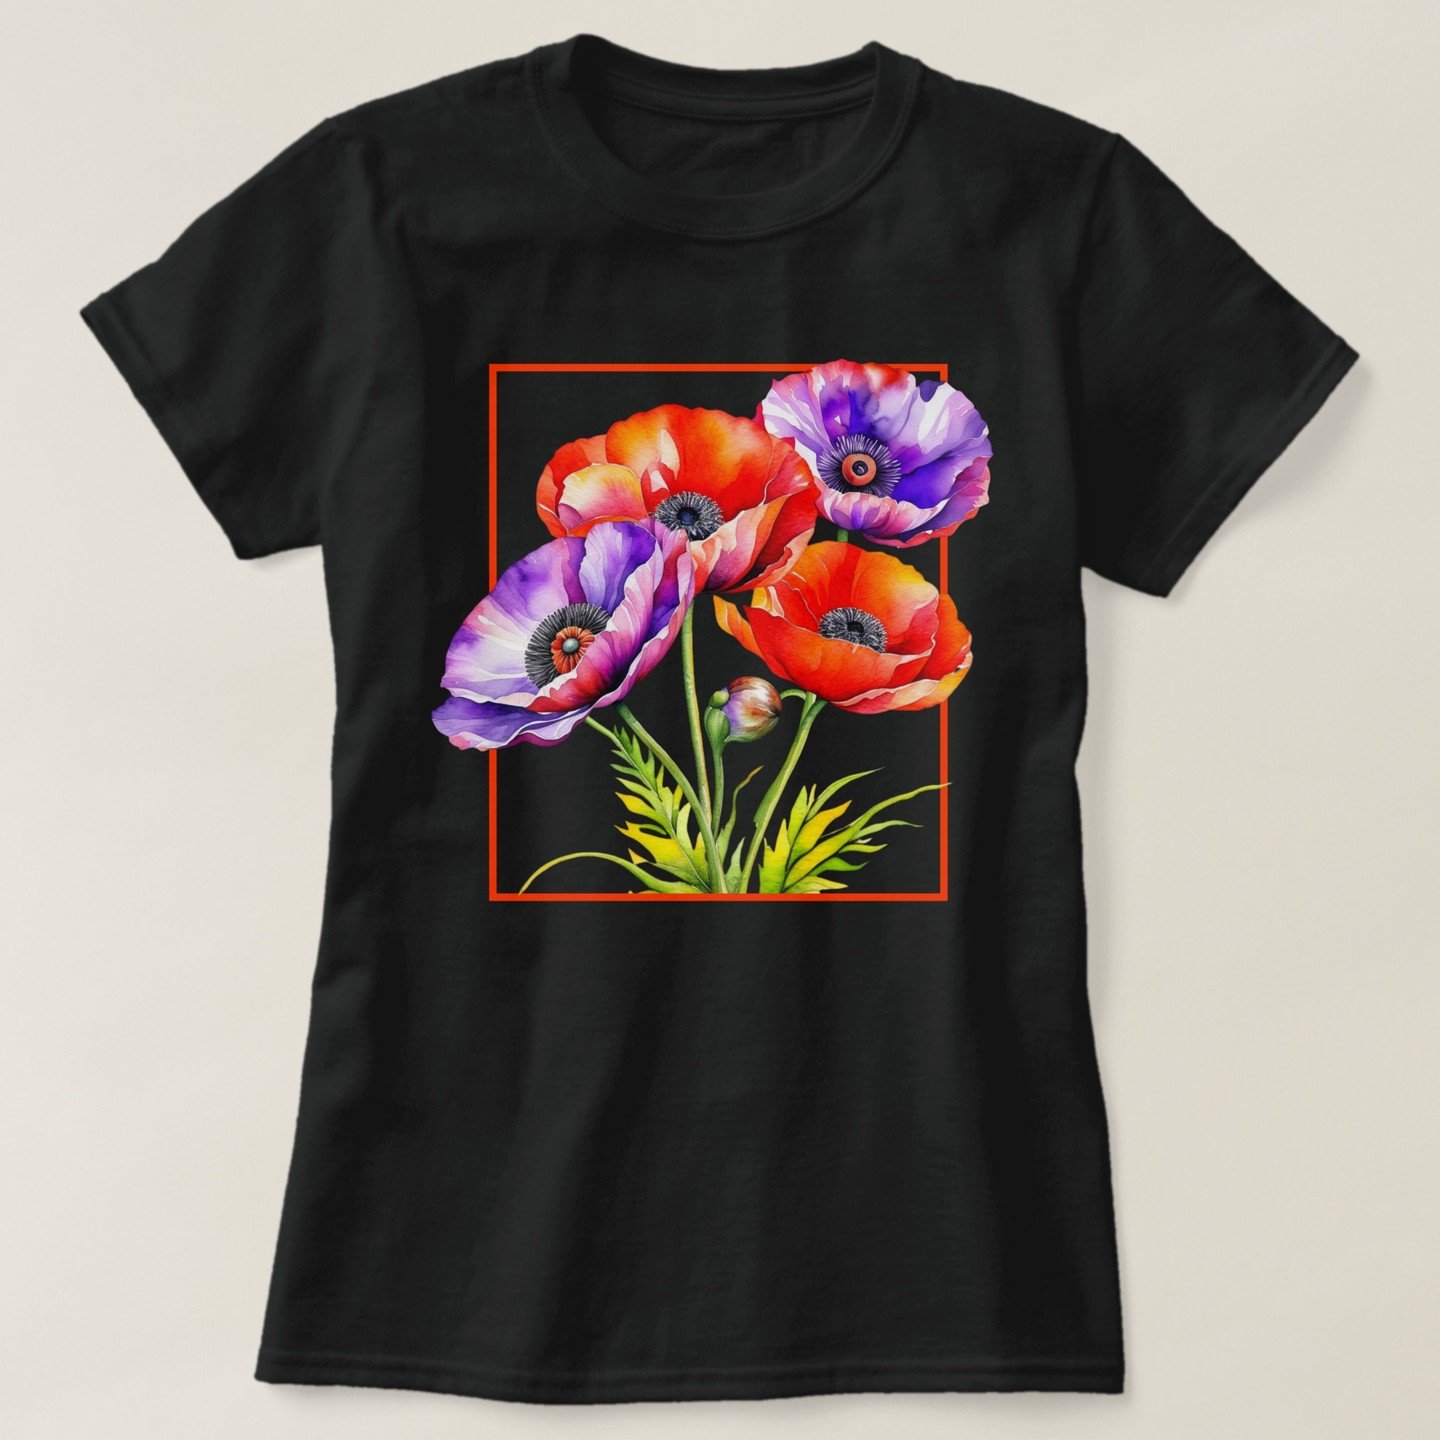 Red and purple poppies for Memorial Day. To commemorate animal victims of war, Animal Aid in Britain issued a purple poppy to be worn alongside the traditional red poppy. #linkinbio
.
#zazzle #redbubble #teepublic #zazzlemade #shirt #stickers #mugs #